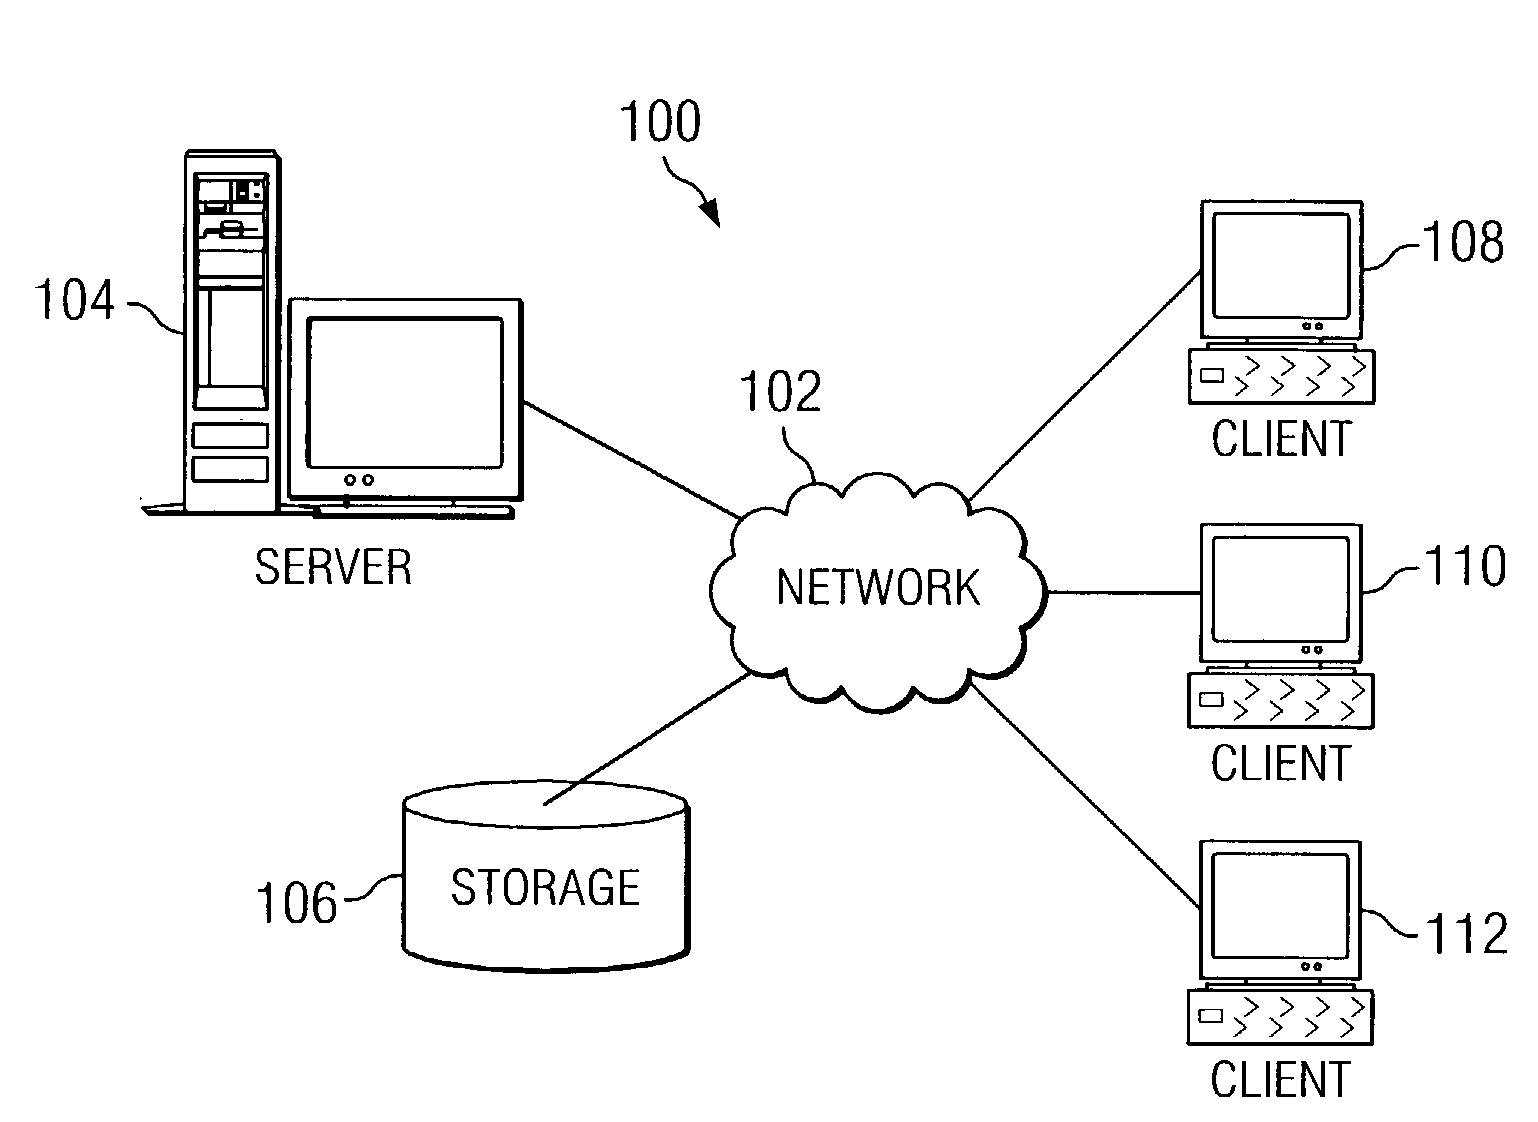 Apparatus and methods for co-location and offloading of web site traffic based on traffic pattern recognition